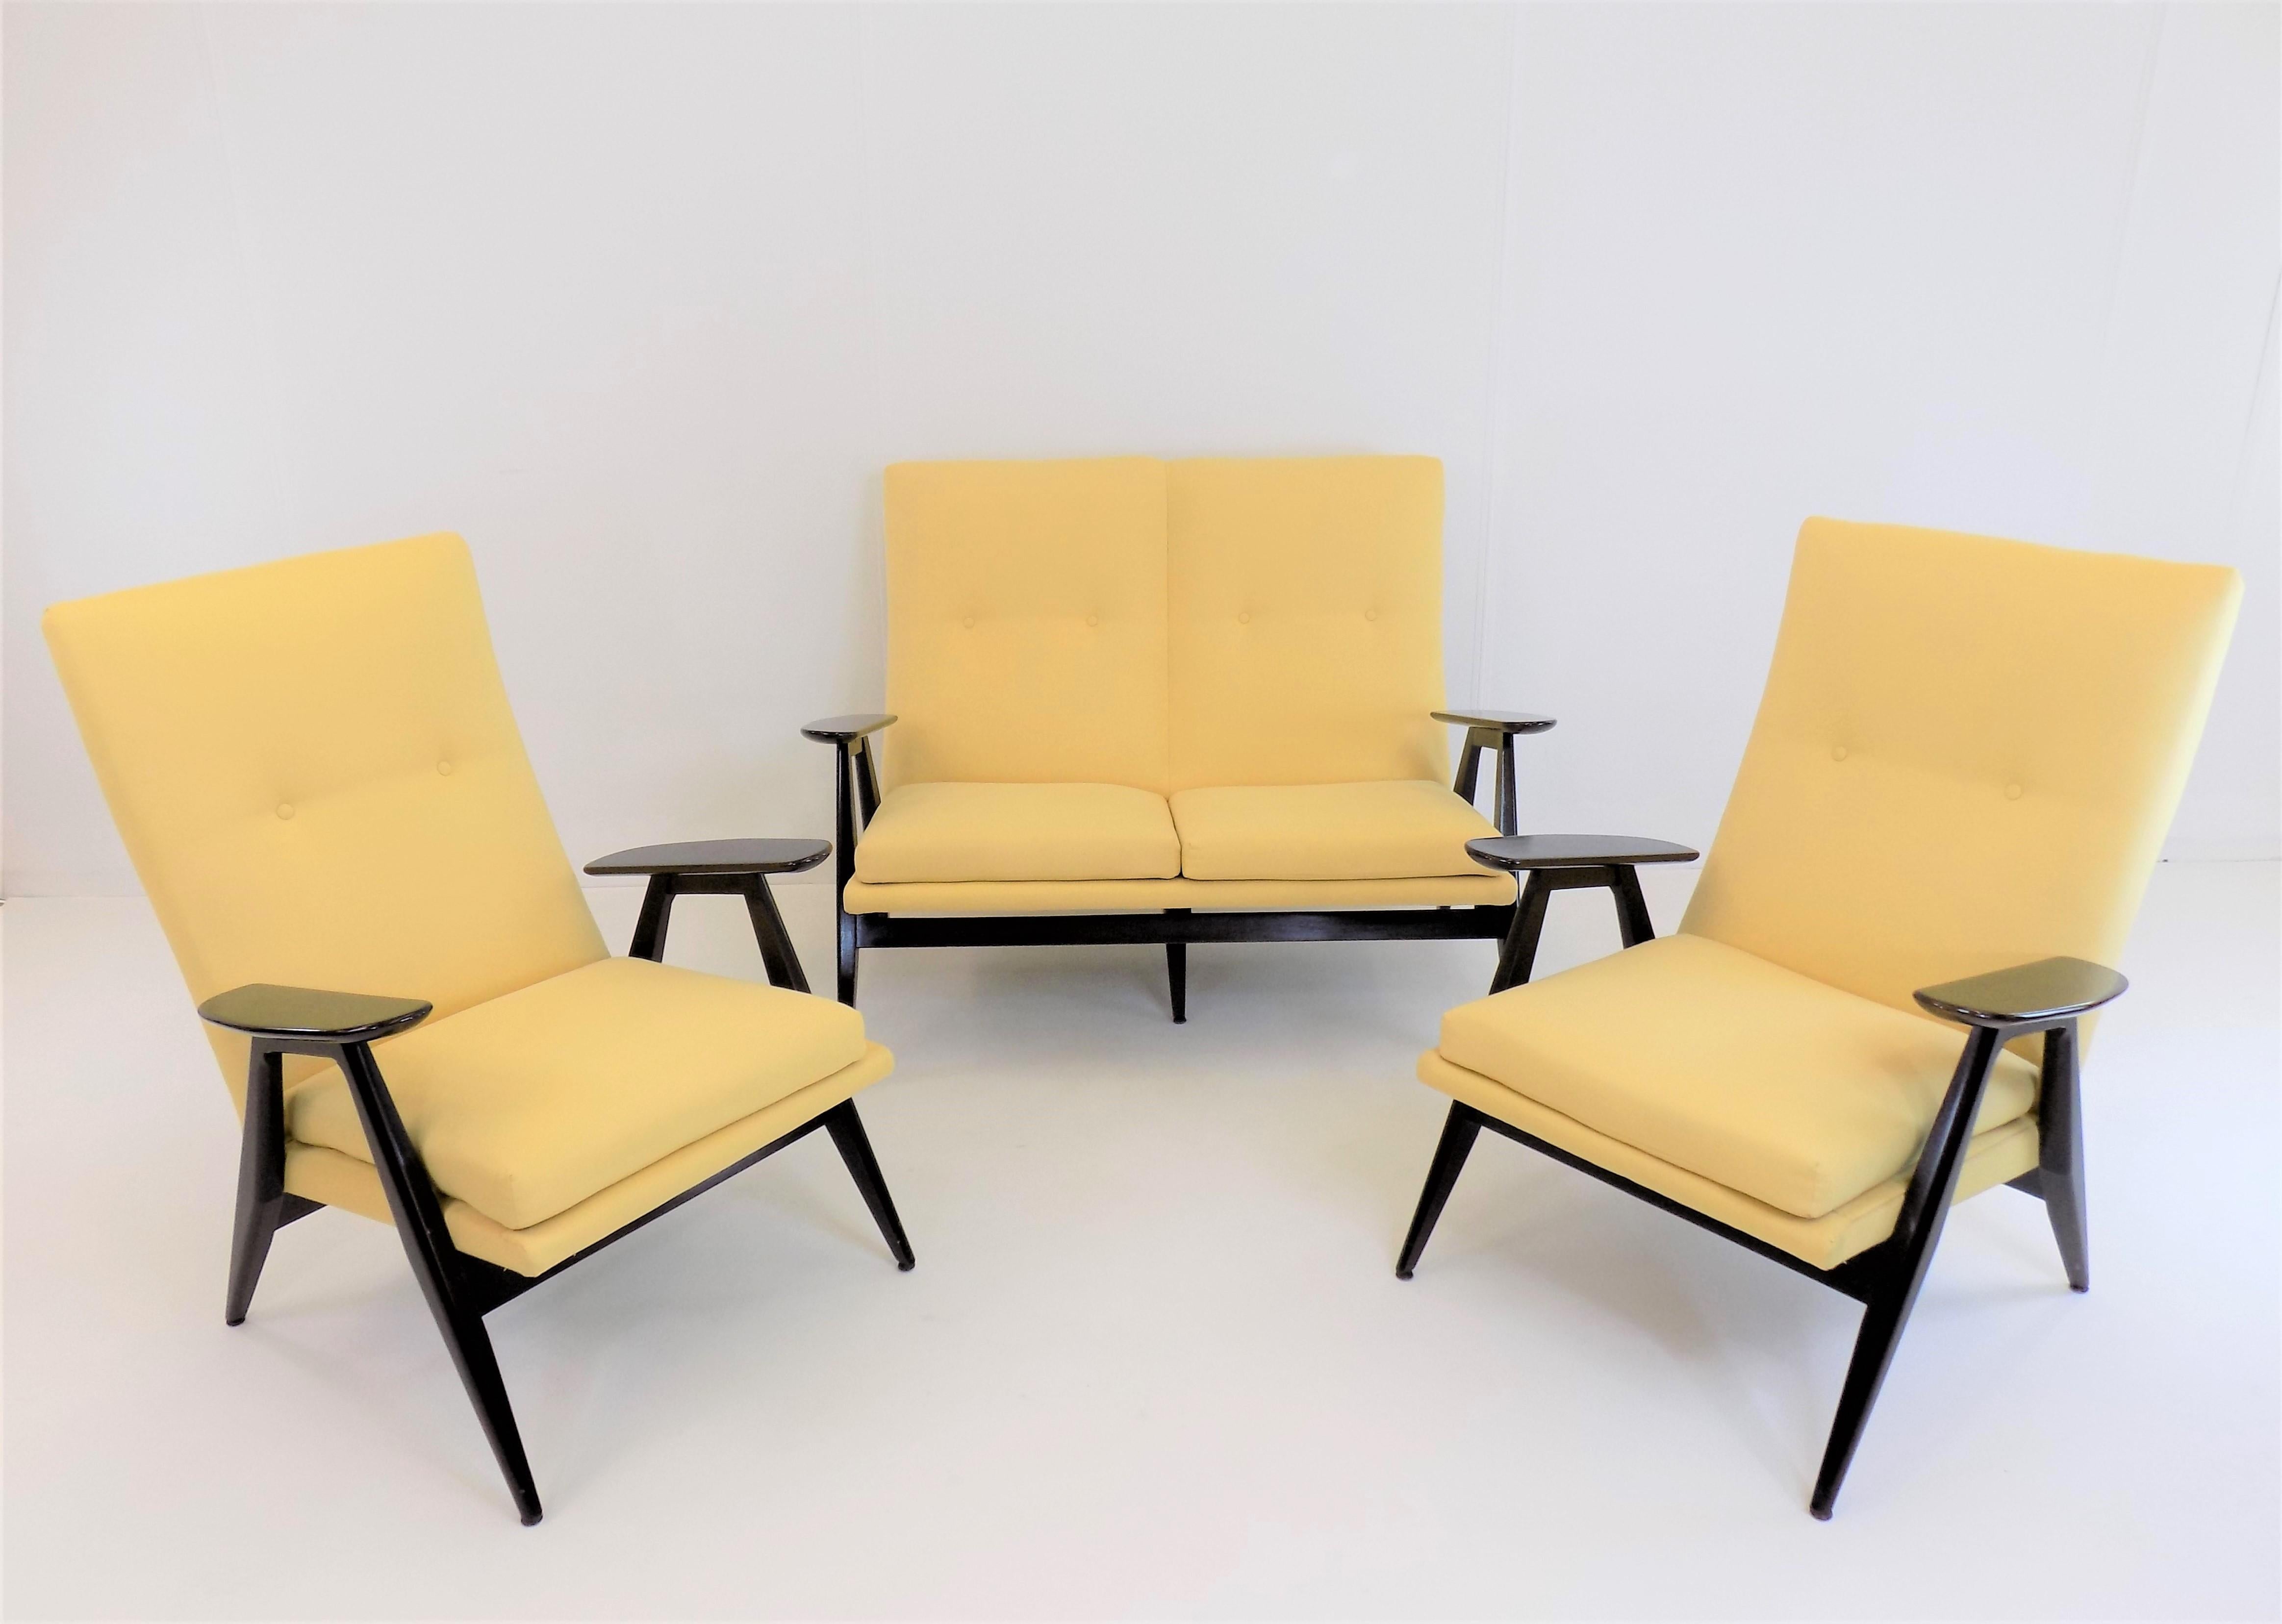 The SK 640 seating group consists of a 2-seater canape and 2 armchairs is in excellent condition. The armchairs and the 2-seater have recently been re-upholstered and upholstered with the high-quality Ligne Roset cotton fabric Manila Mais. The